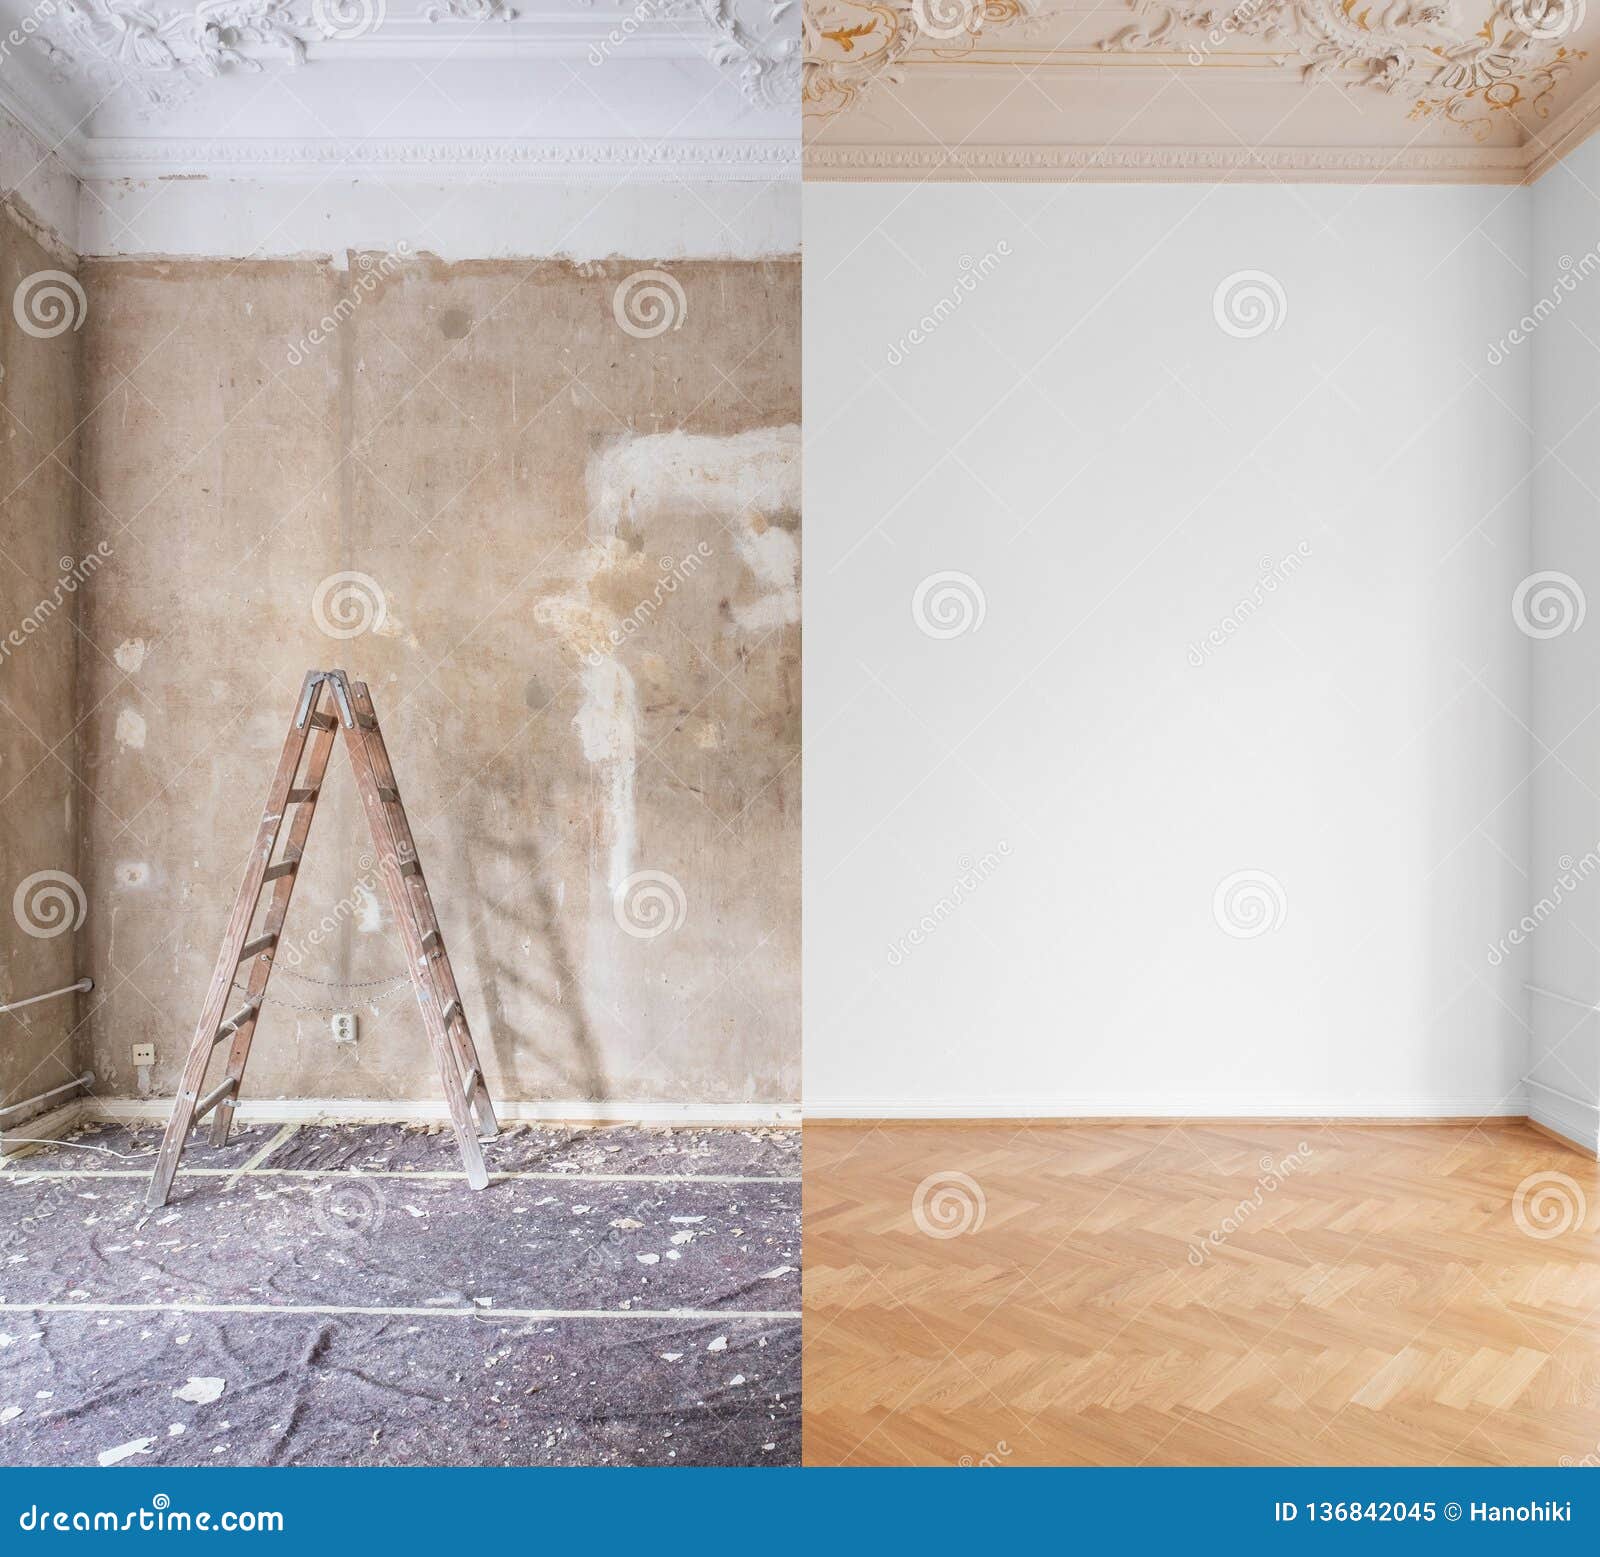 home renovation, room before and after restoration / refurbishment